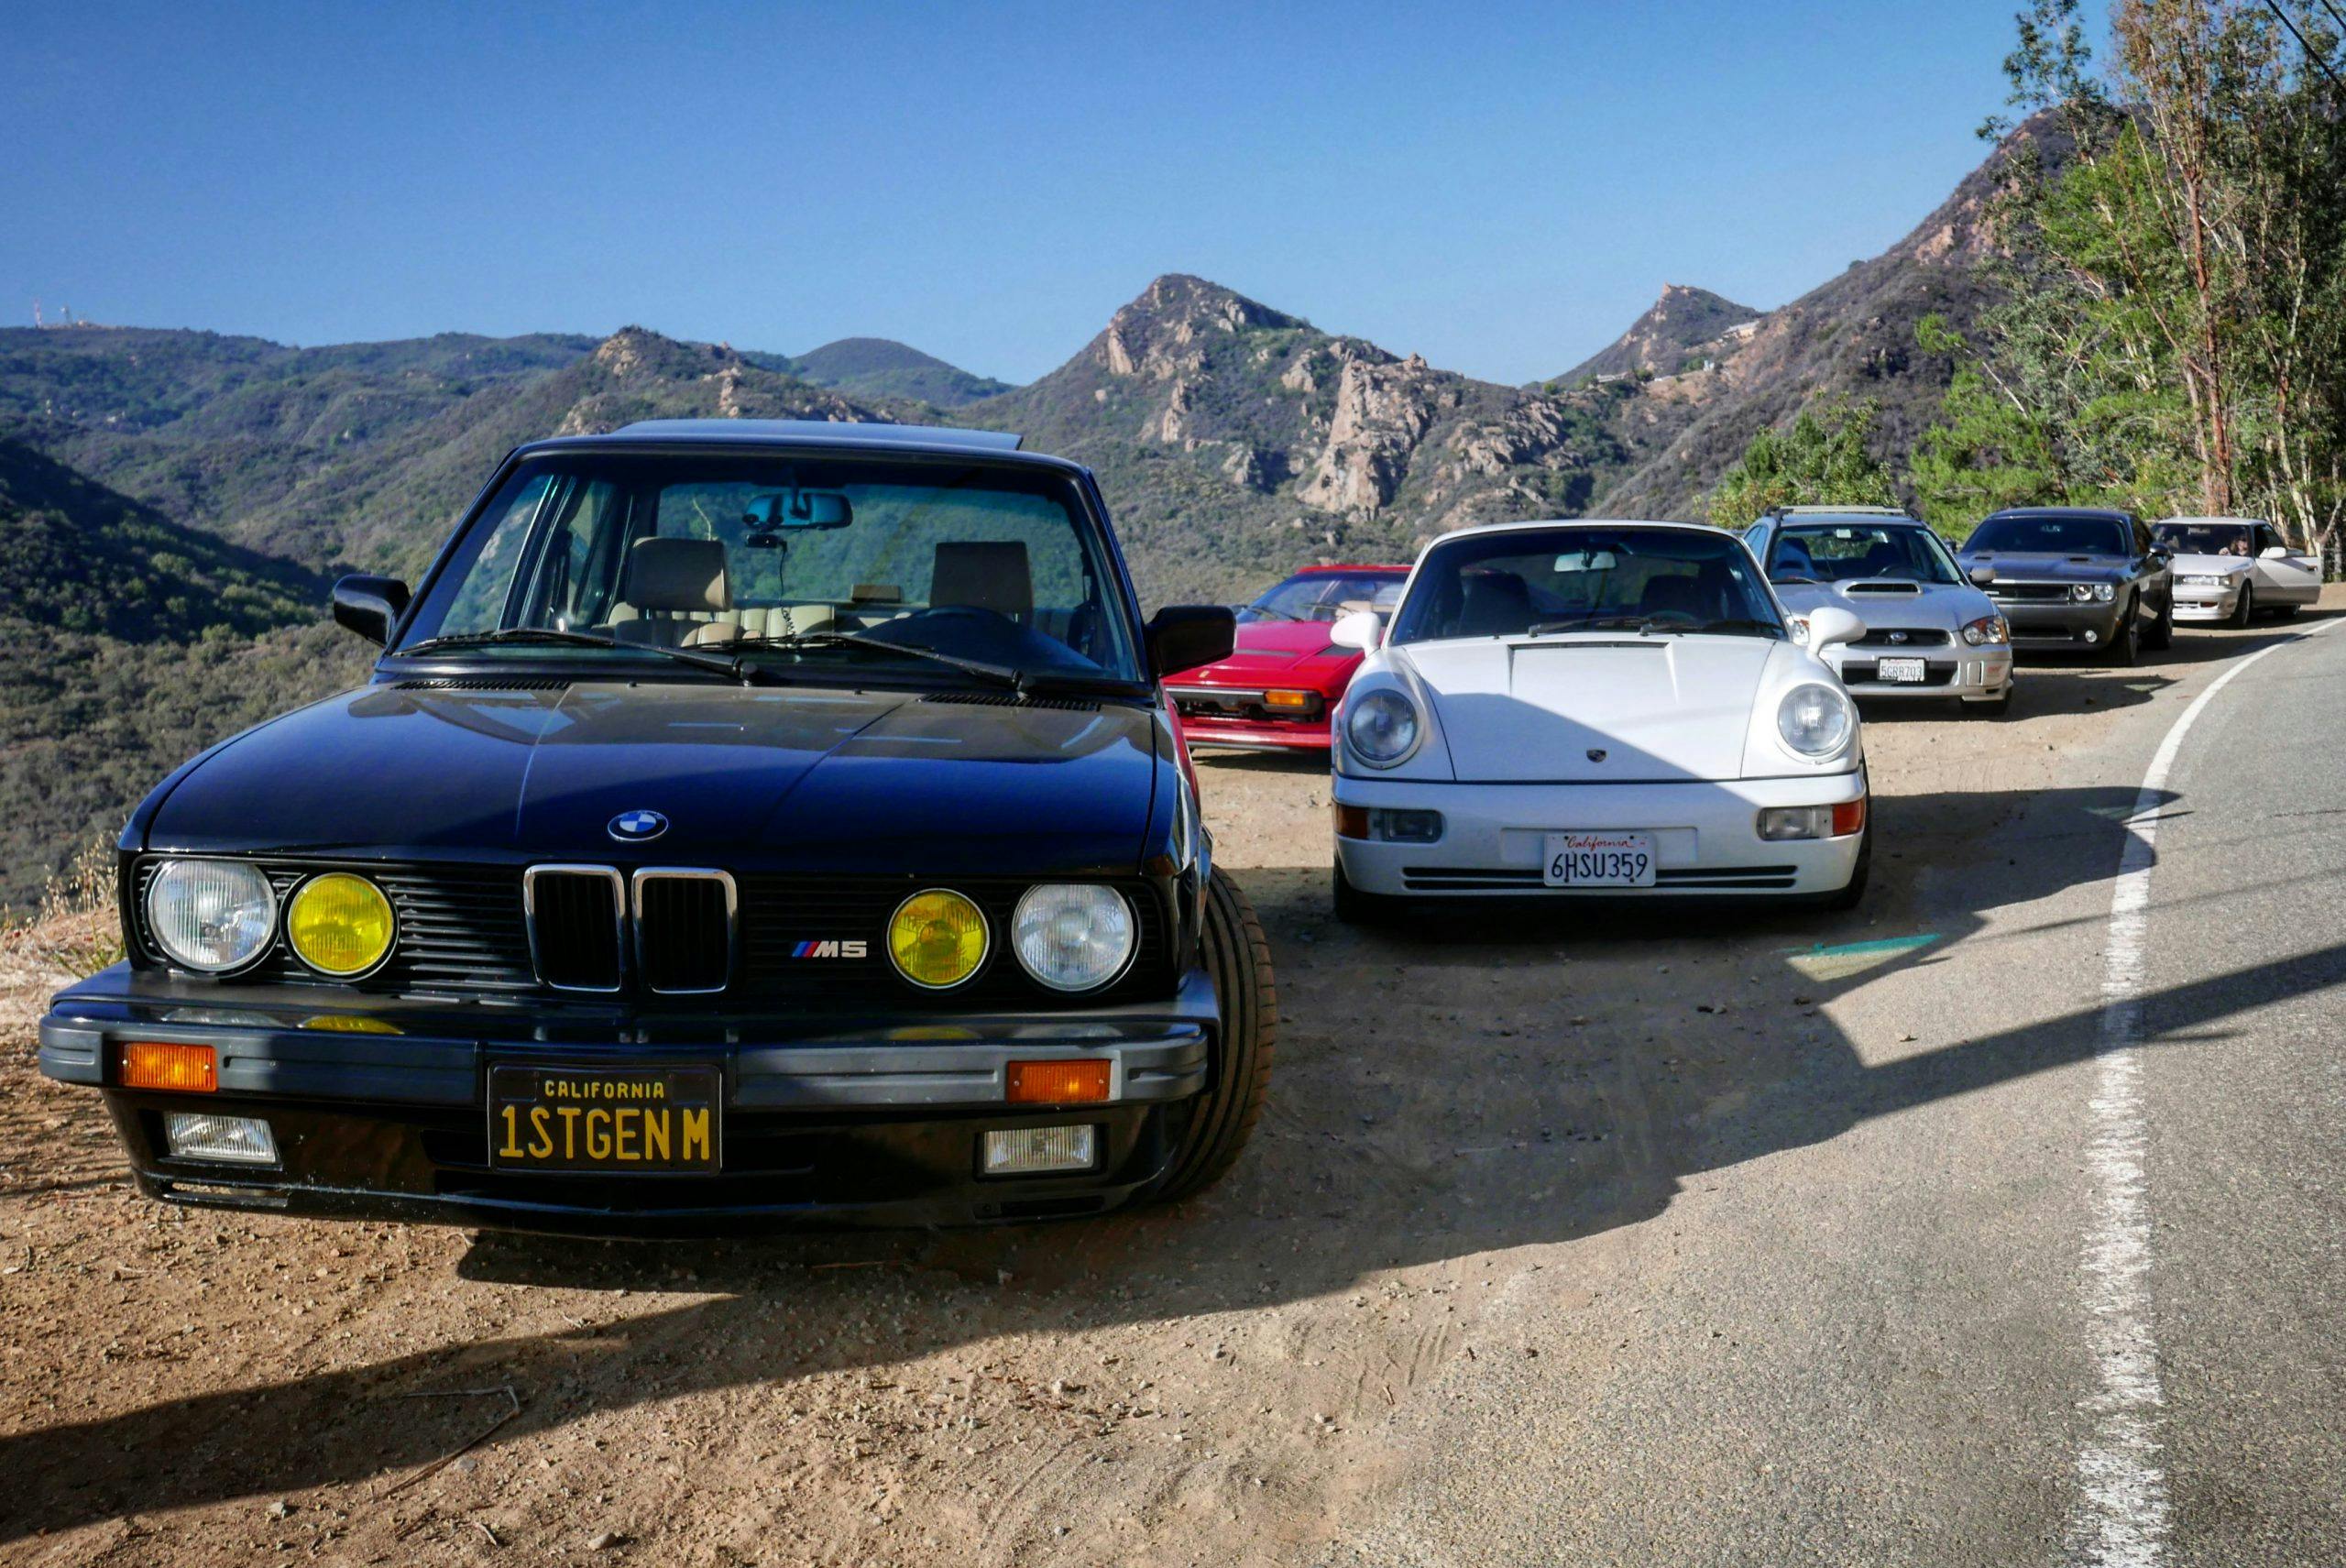 1988 BMW E28 M5 and friends